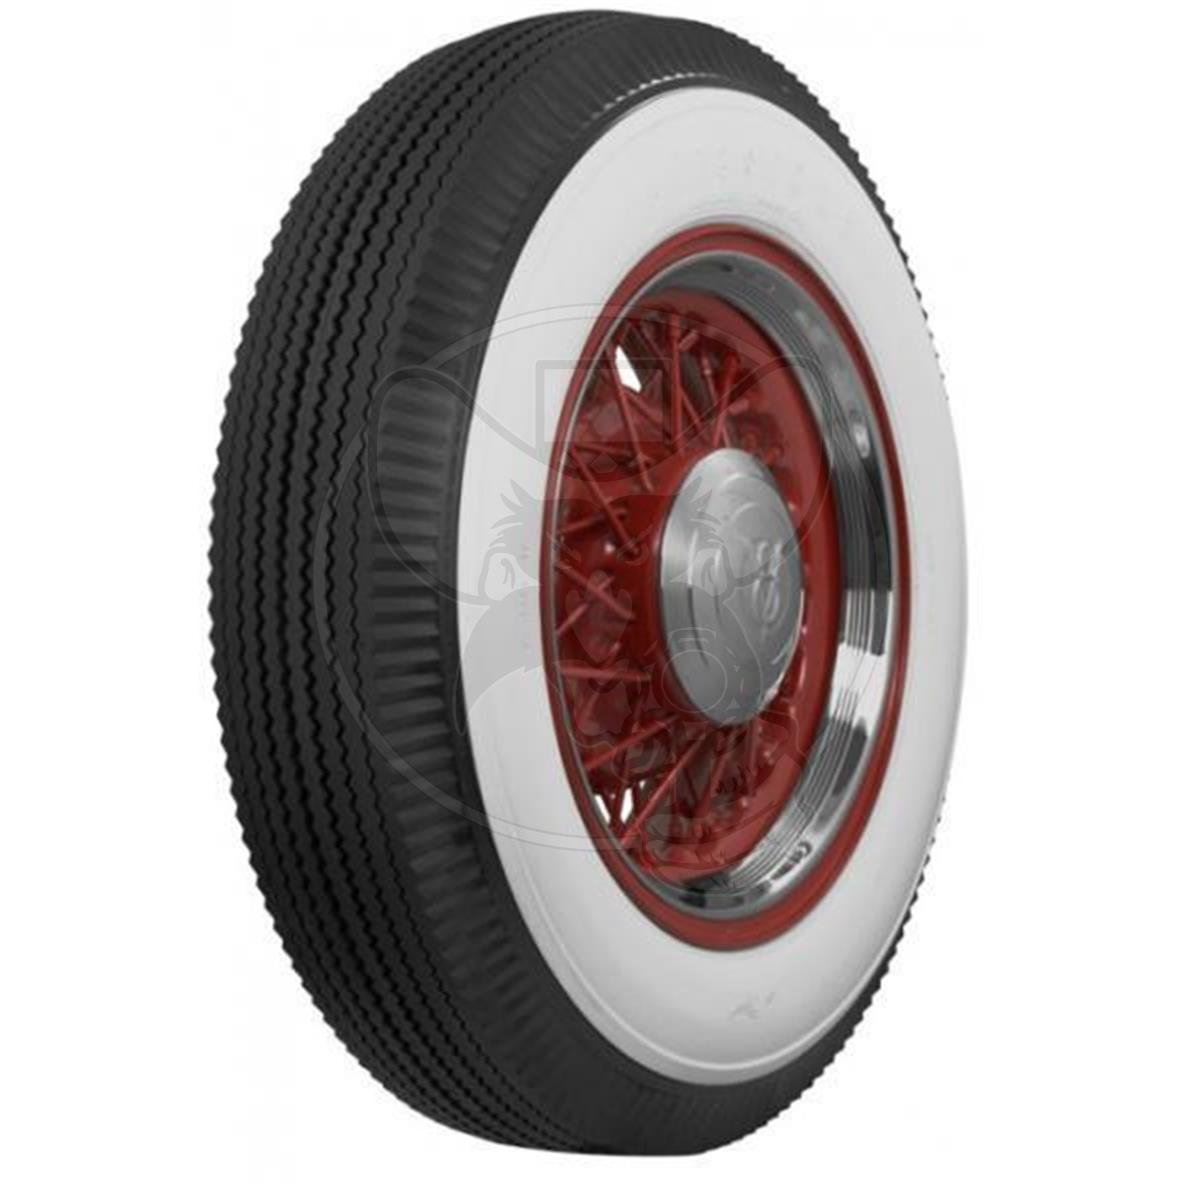 FIRESTONE TYRE BIAS PLY 6.70 x 15" WITH 3.25" WHITEWALL 28.58" OAD